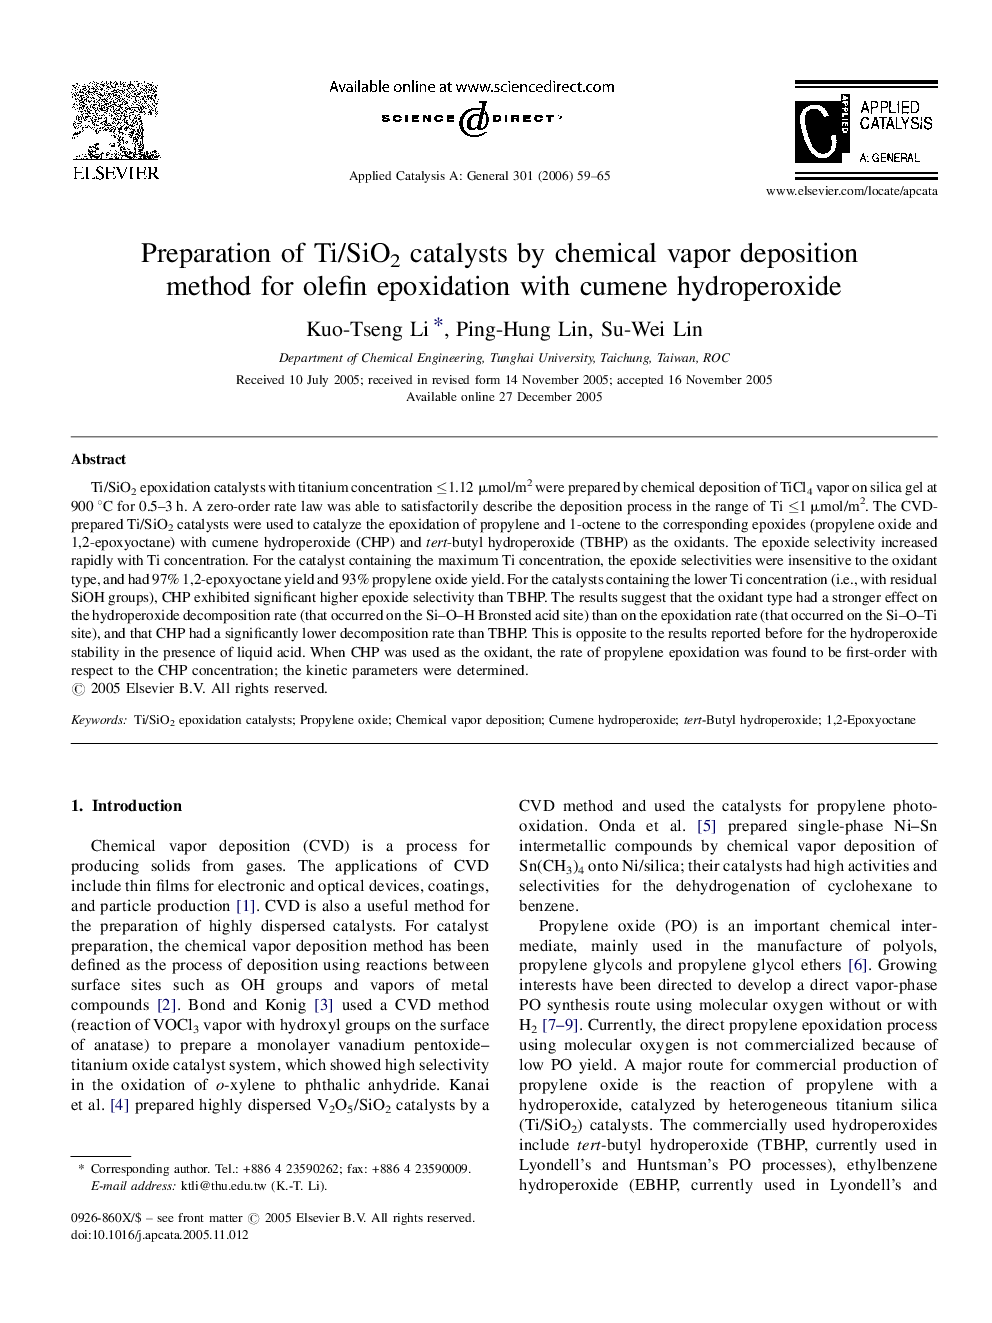 Preparation of Ti/SiO2 catalysts by chemical vapor deposition method for olefin epoxidation with cumene hydroperoxide